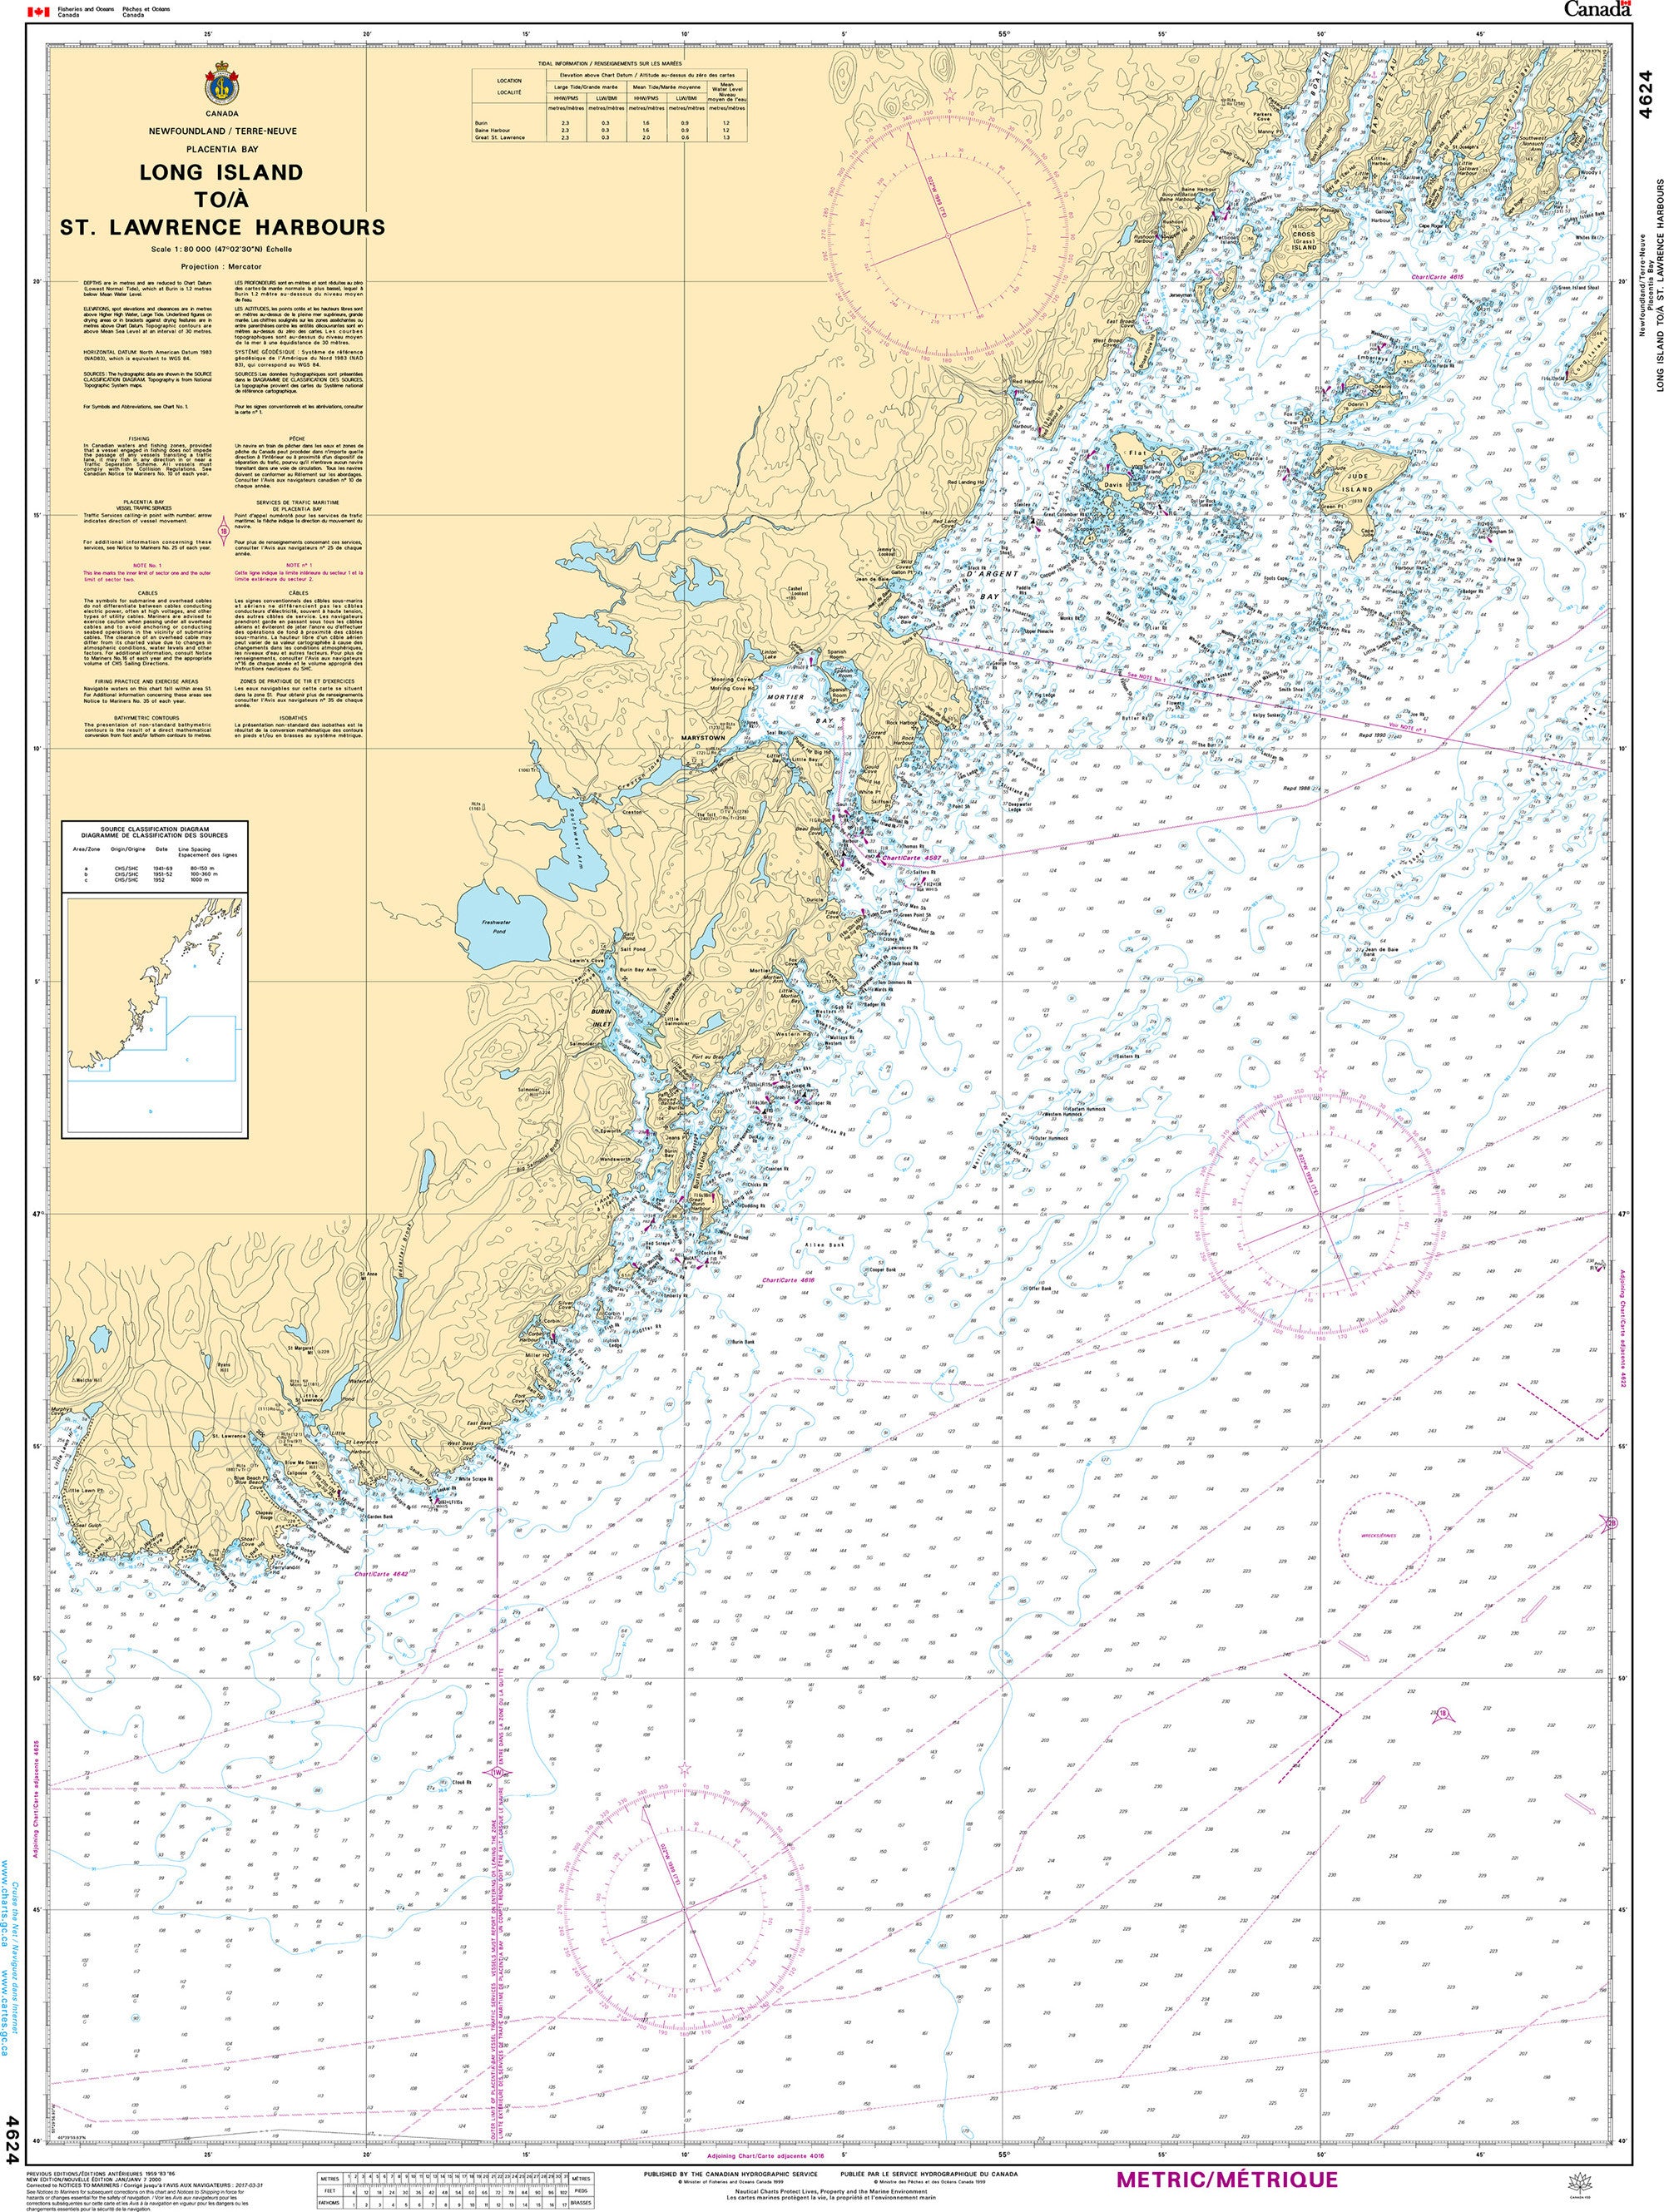 Canadian Hydrographic Service Nautical Chart CHS4624: Long Island to/à St. Lawrence Harbours